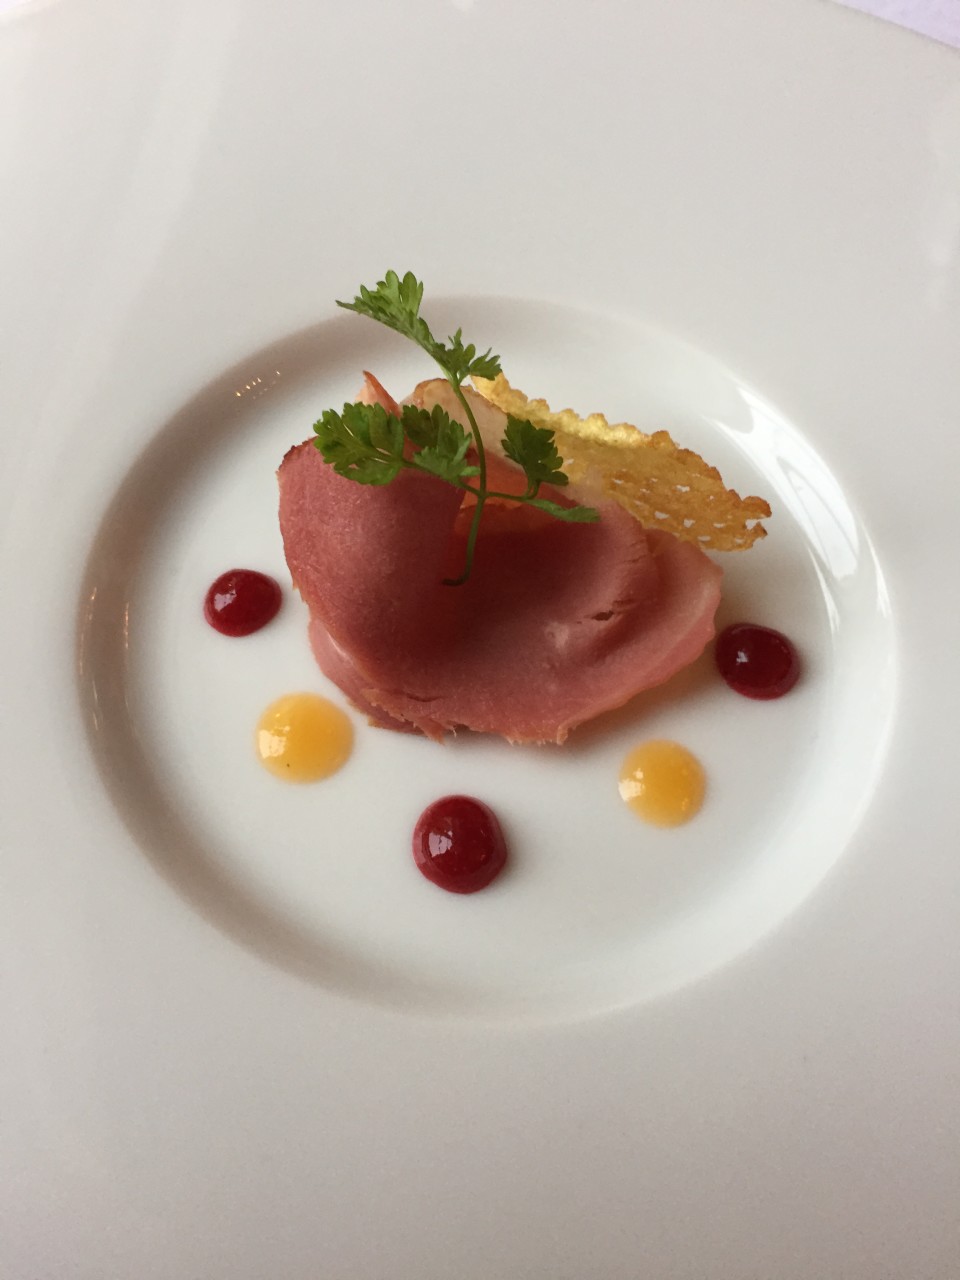 Piano Nobile at Villa Richter : Amuse-bouche of smoked breast of Duck, Cranberry and Apricot sauce, Potato Chip